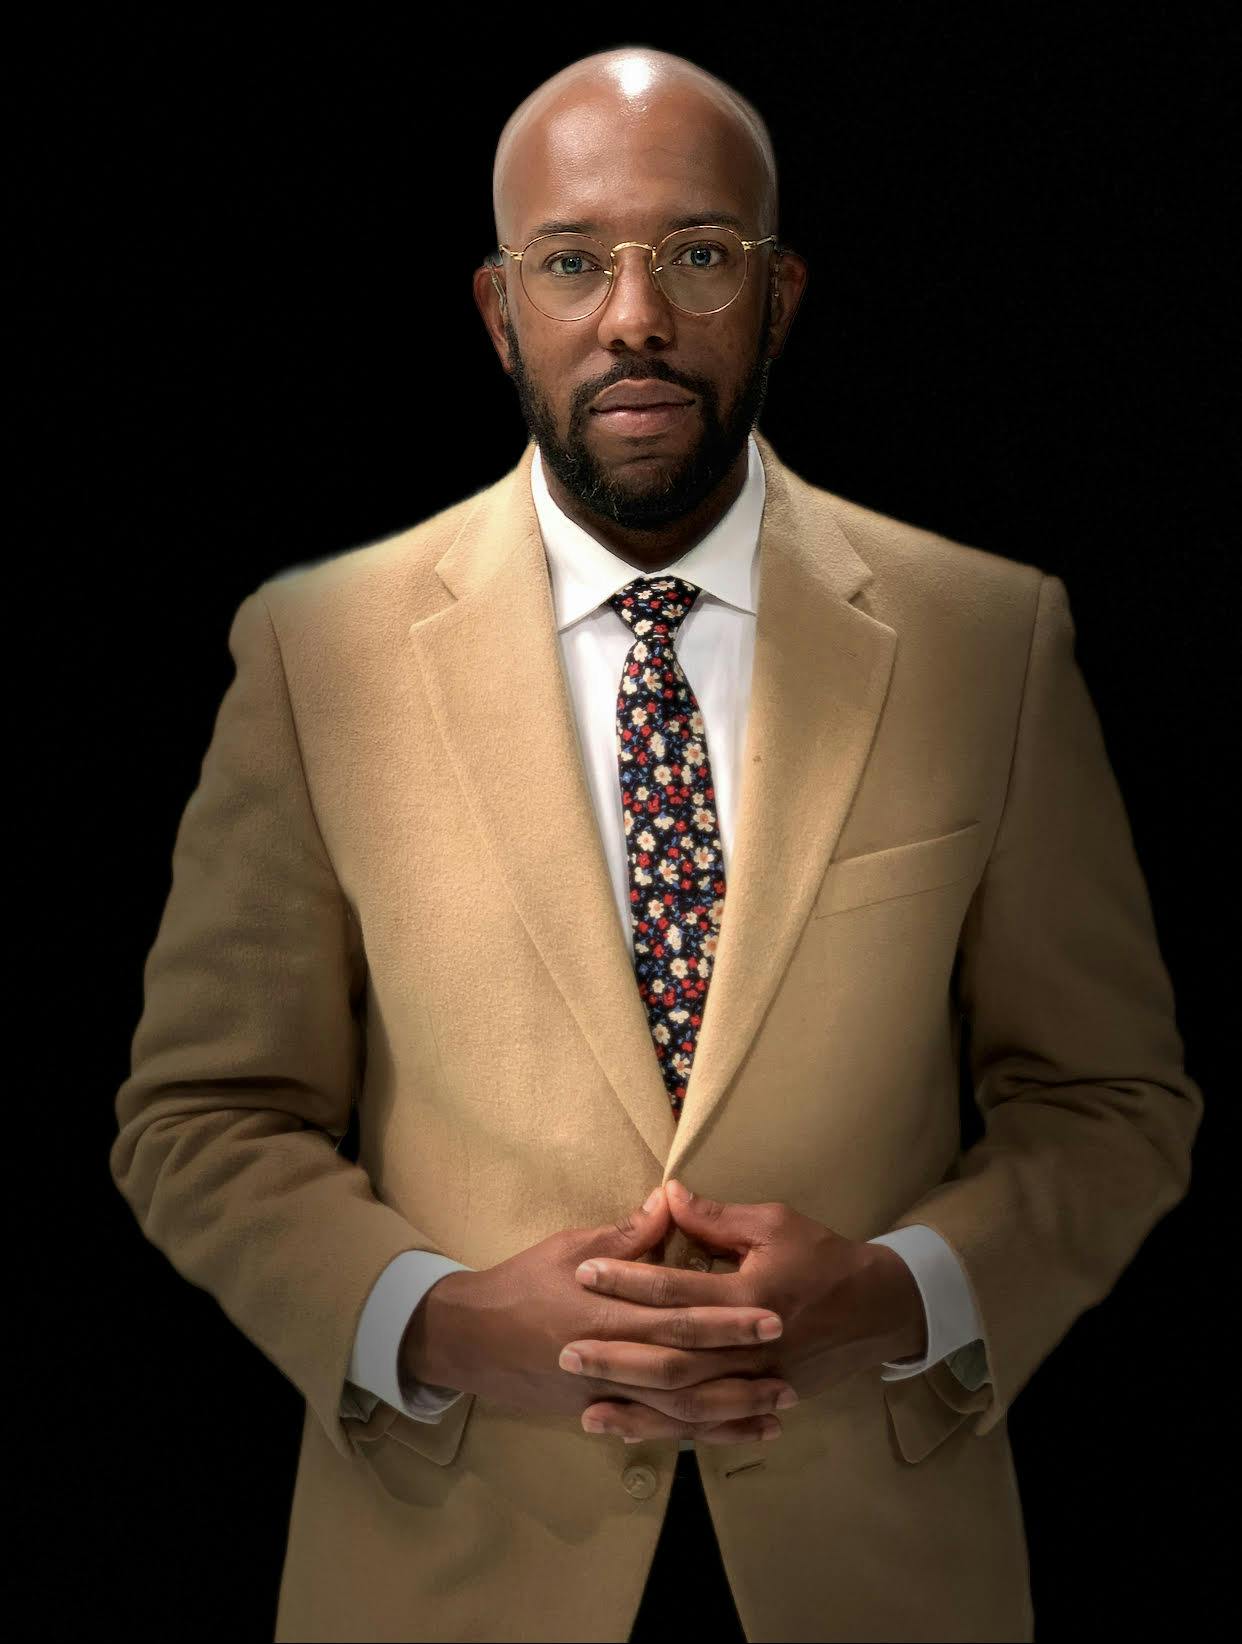 A photo of Christopher Johnson, CEO of Creative Minds, Gallaudet University Project Manager, Division of Equity, Diversity and Inclusive Excellence, Adjunct Professor at Howard Community College